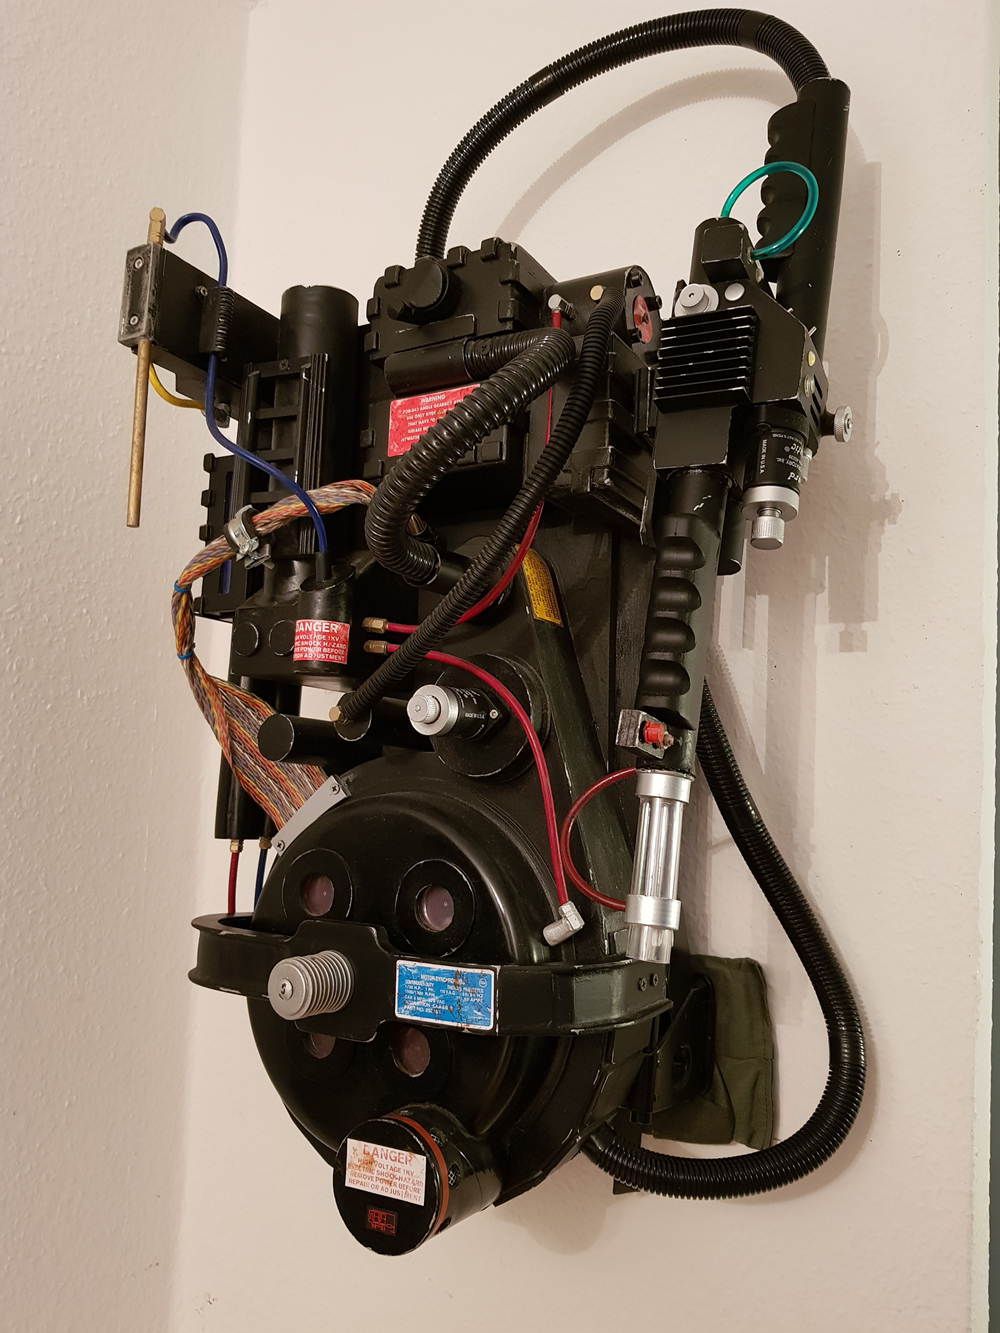 Ghostbusters Proton Pack Replica